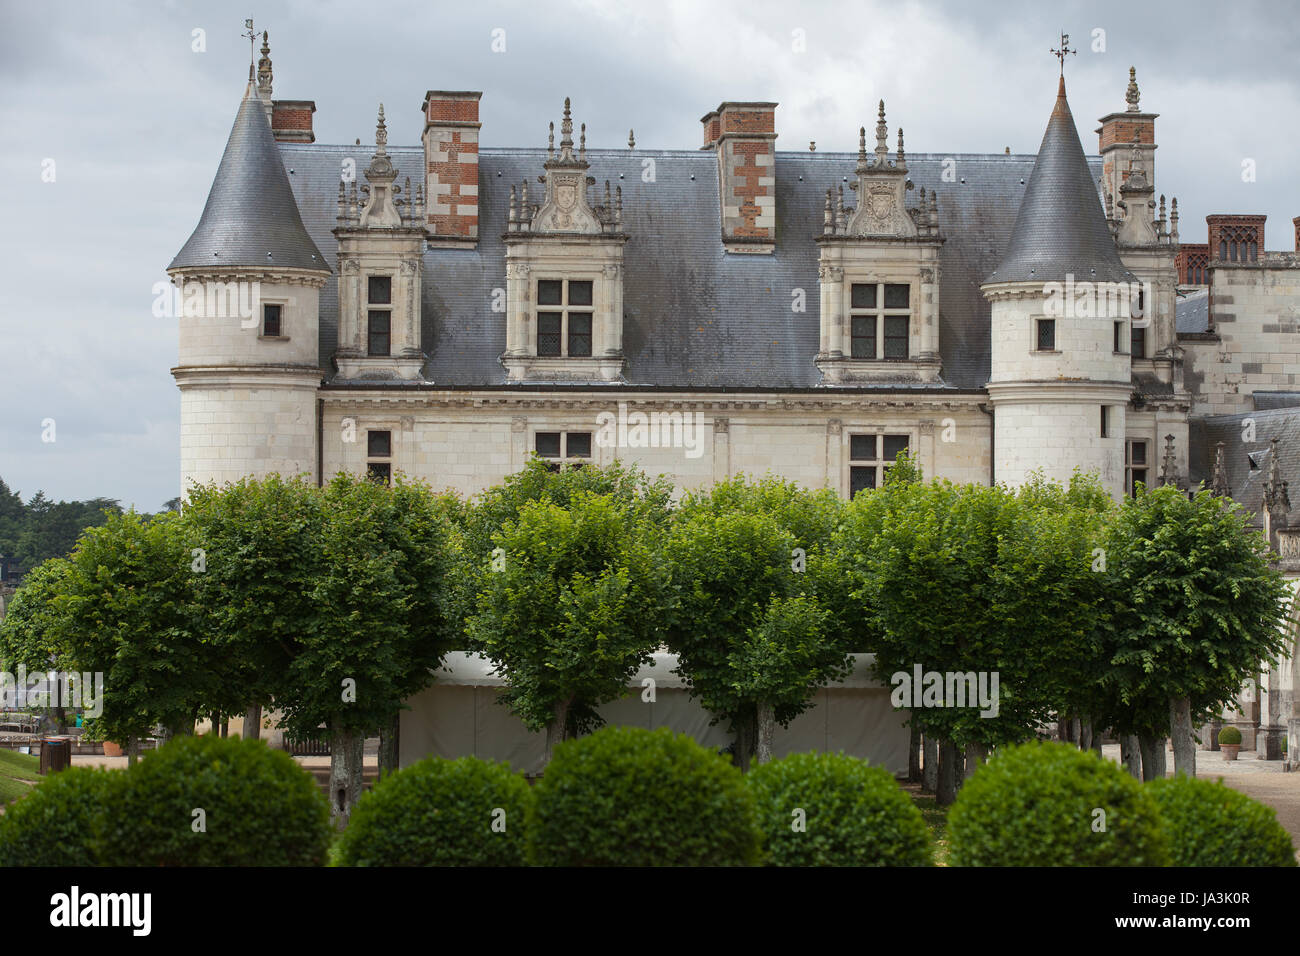 france, valley, castle, chateau, tower, travel, historical, monument, famous, Stock Photo